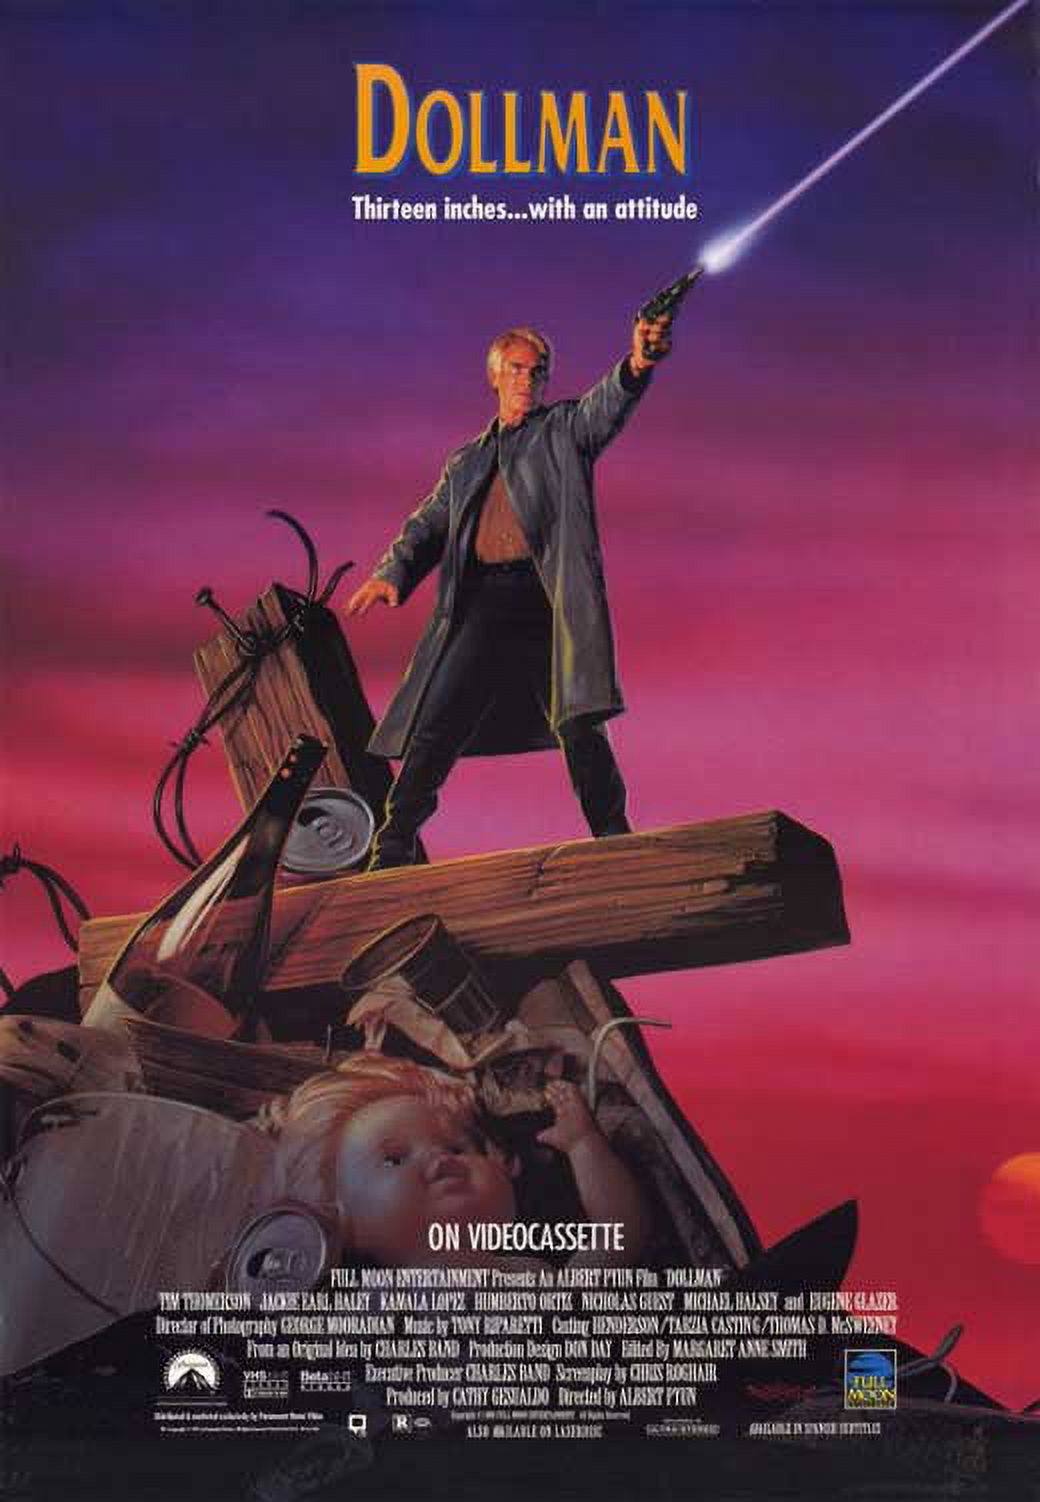 Dollman - movie POSTER (Style A) (11" x 17") (1990) - image 1 of 2